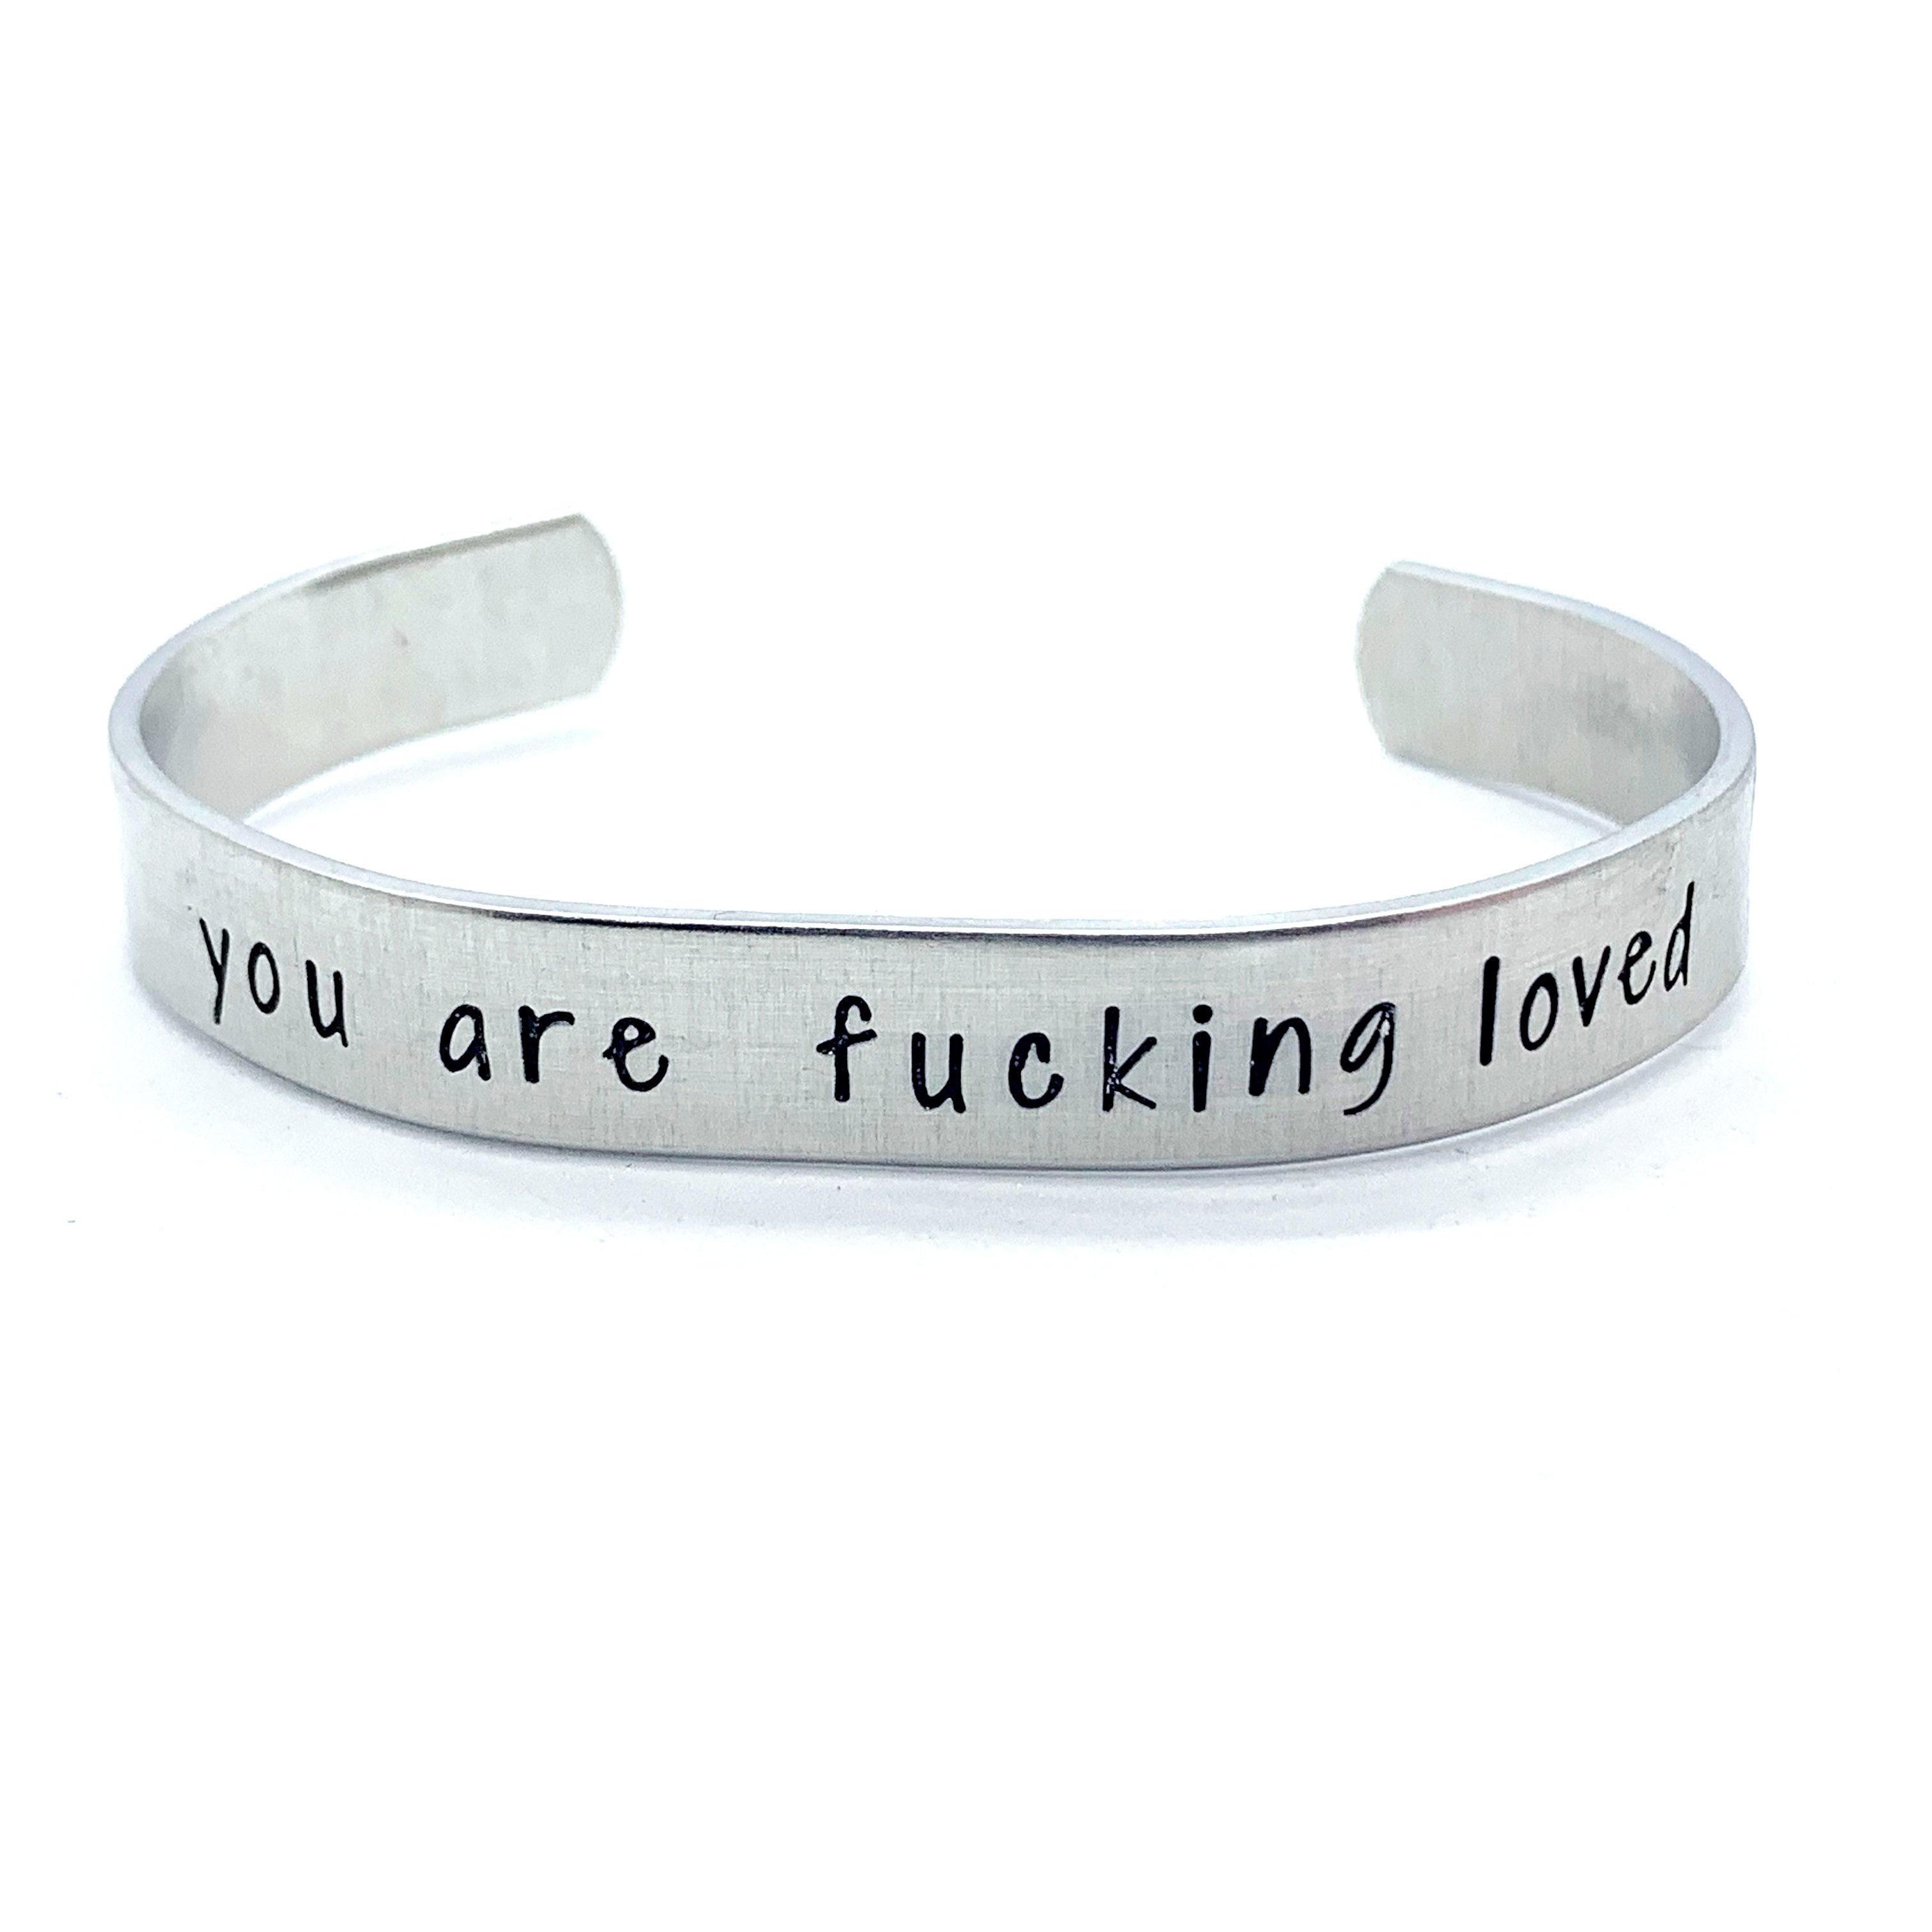 ⅜ inch Aluminum Cuff - You Are Fucking Loved